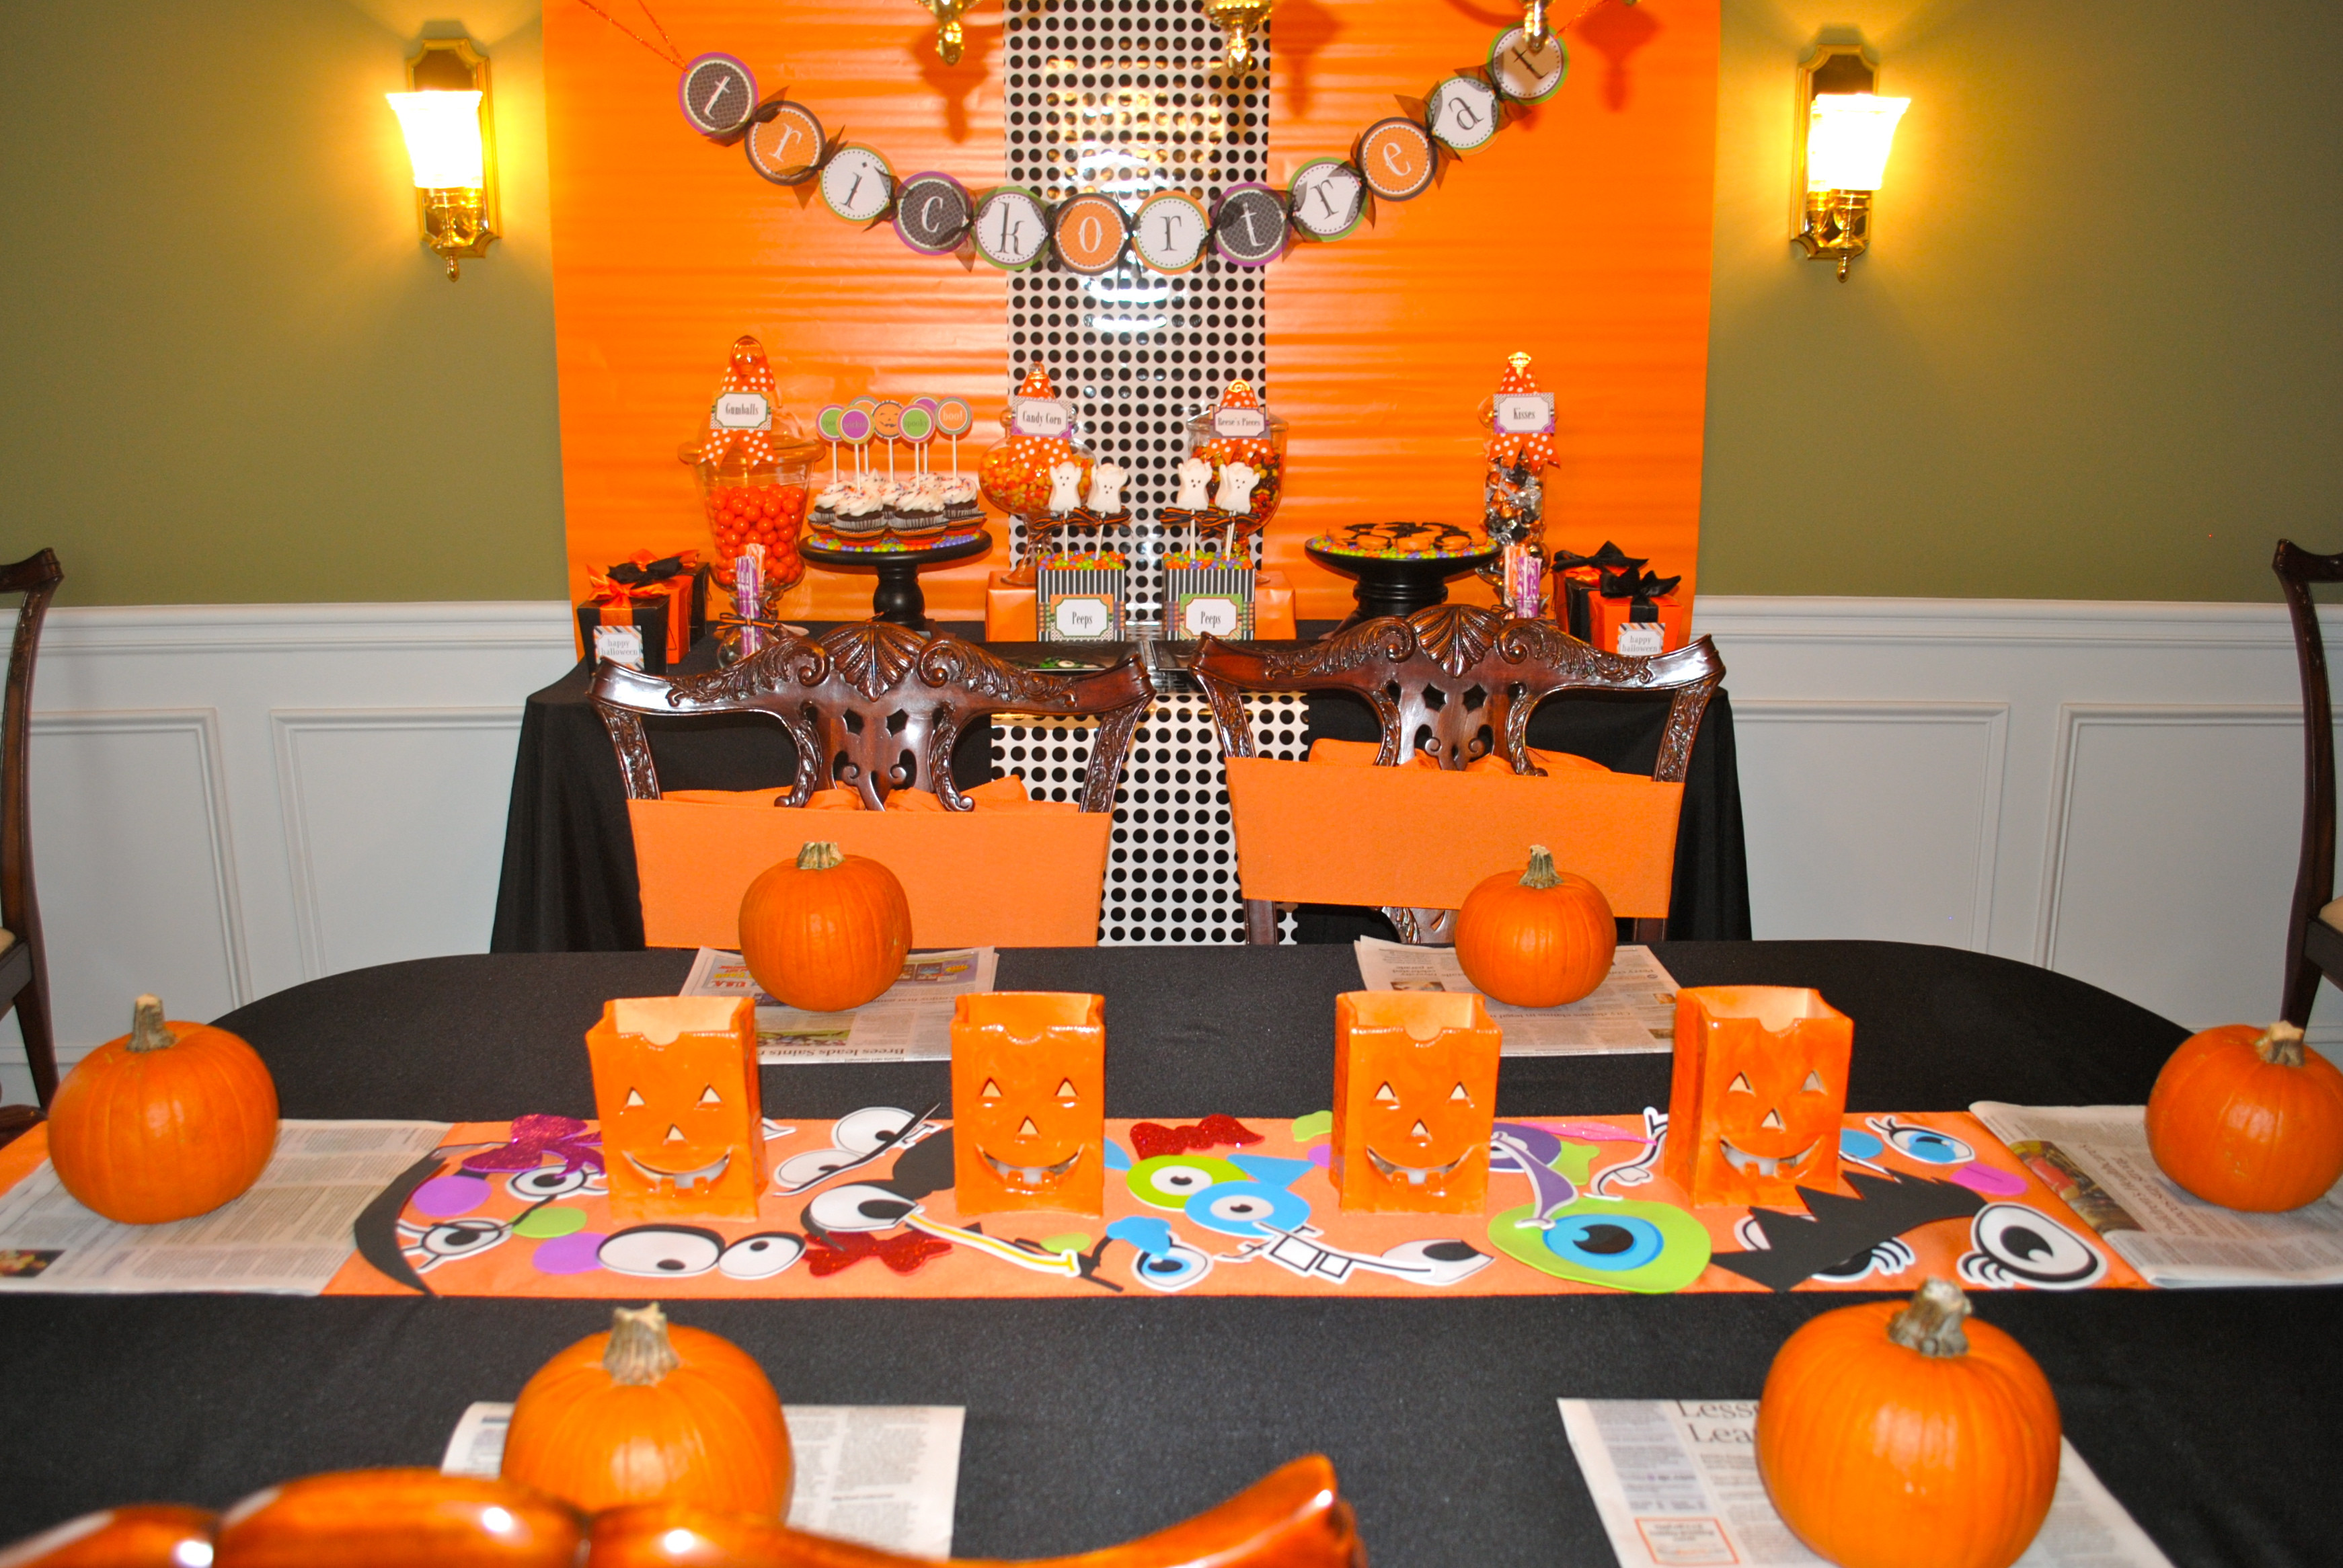 Halloween Birthday Party Ideas For Kids
 Halloween Party Ideas For Kids 2019 With Daily